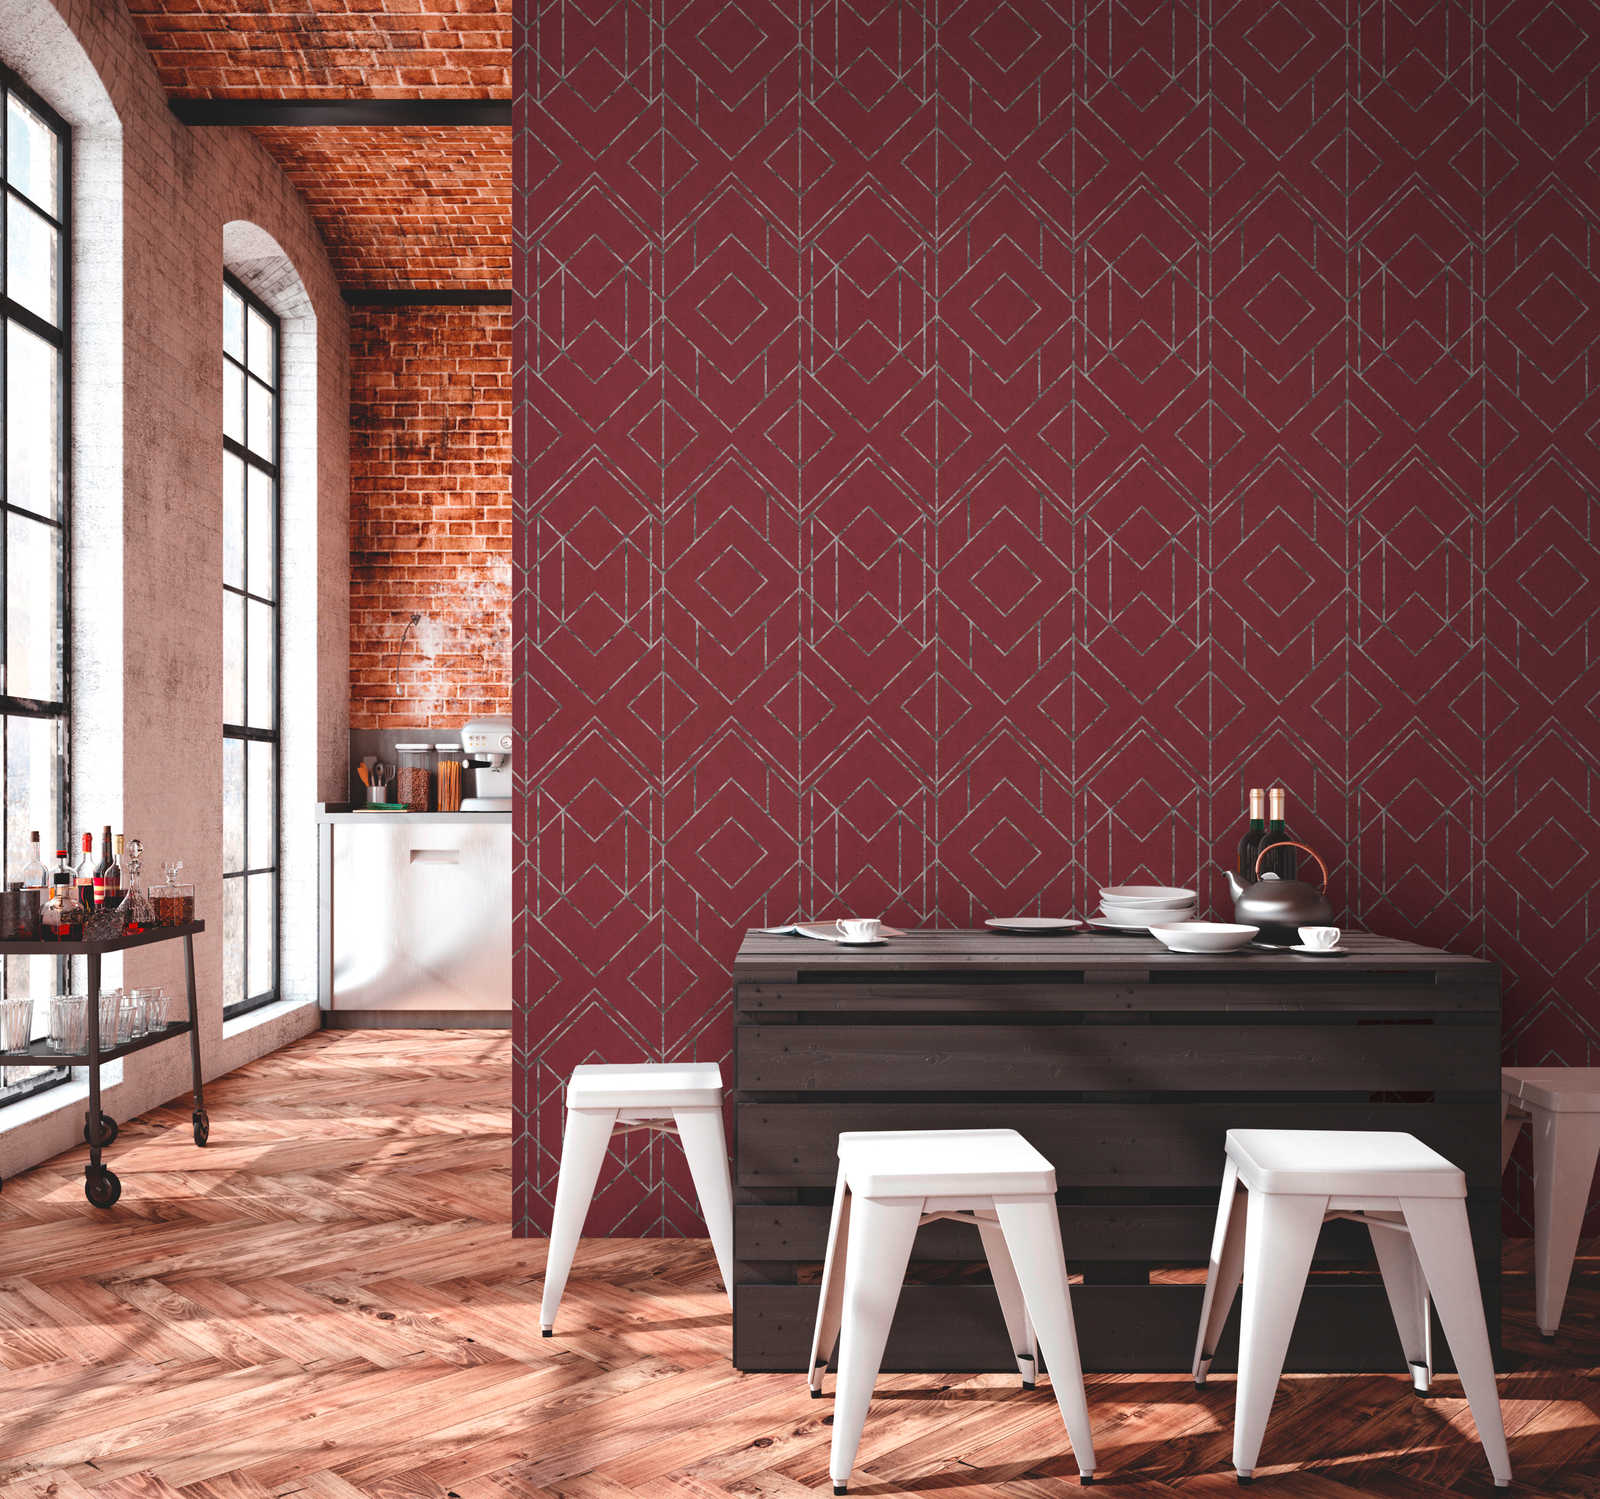             Wallpaper with gold accent in modern graphic style - metallic, red, black
        